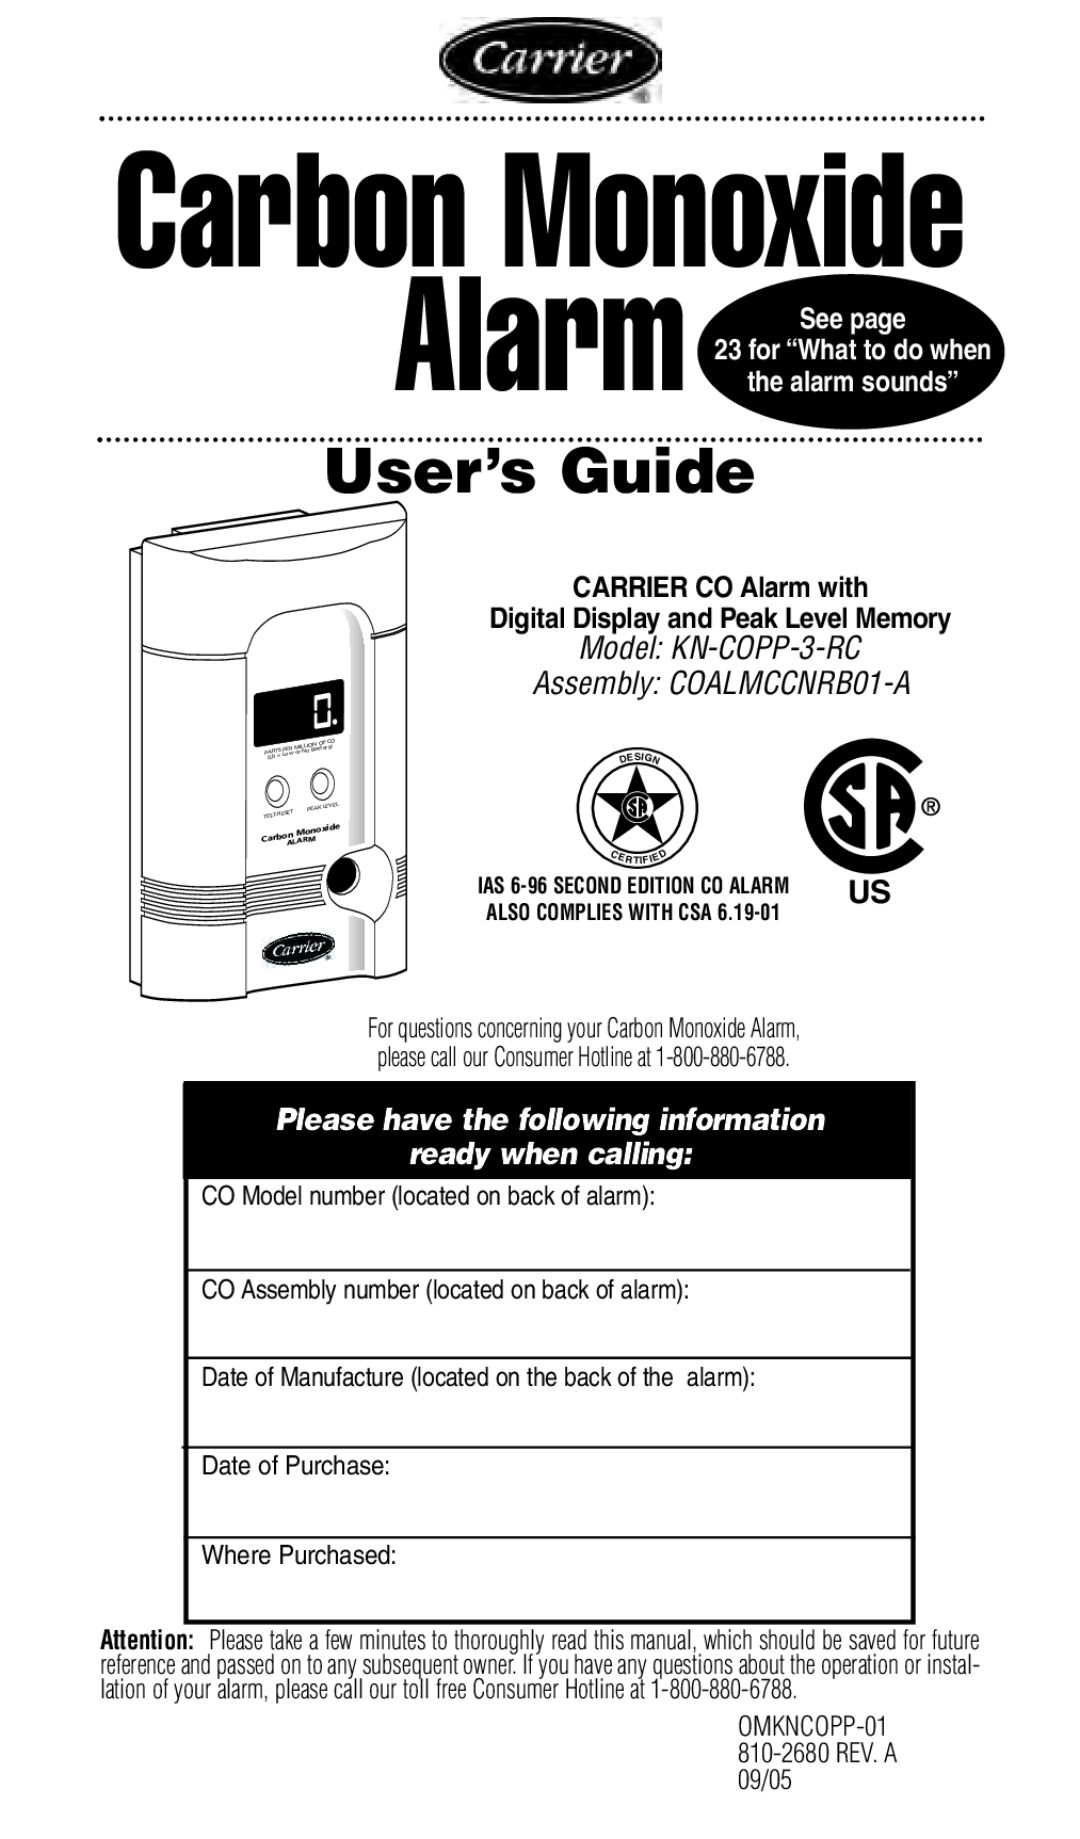 Kidde KN-COPP-3-RC manual Carbon Monoxide, User’s Guide, Alarm See page 23 for “What to do when, the alarm sounds”, Design 